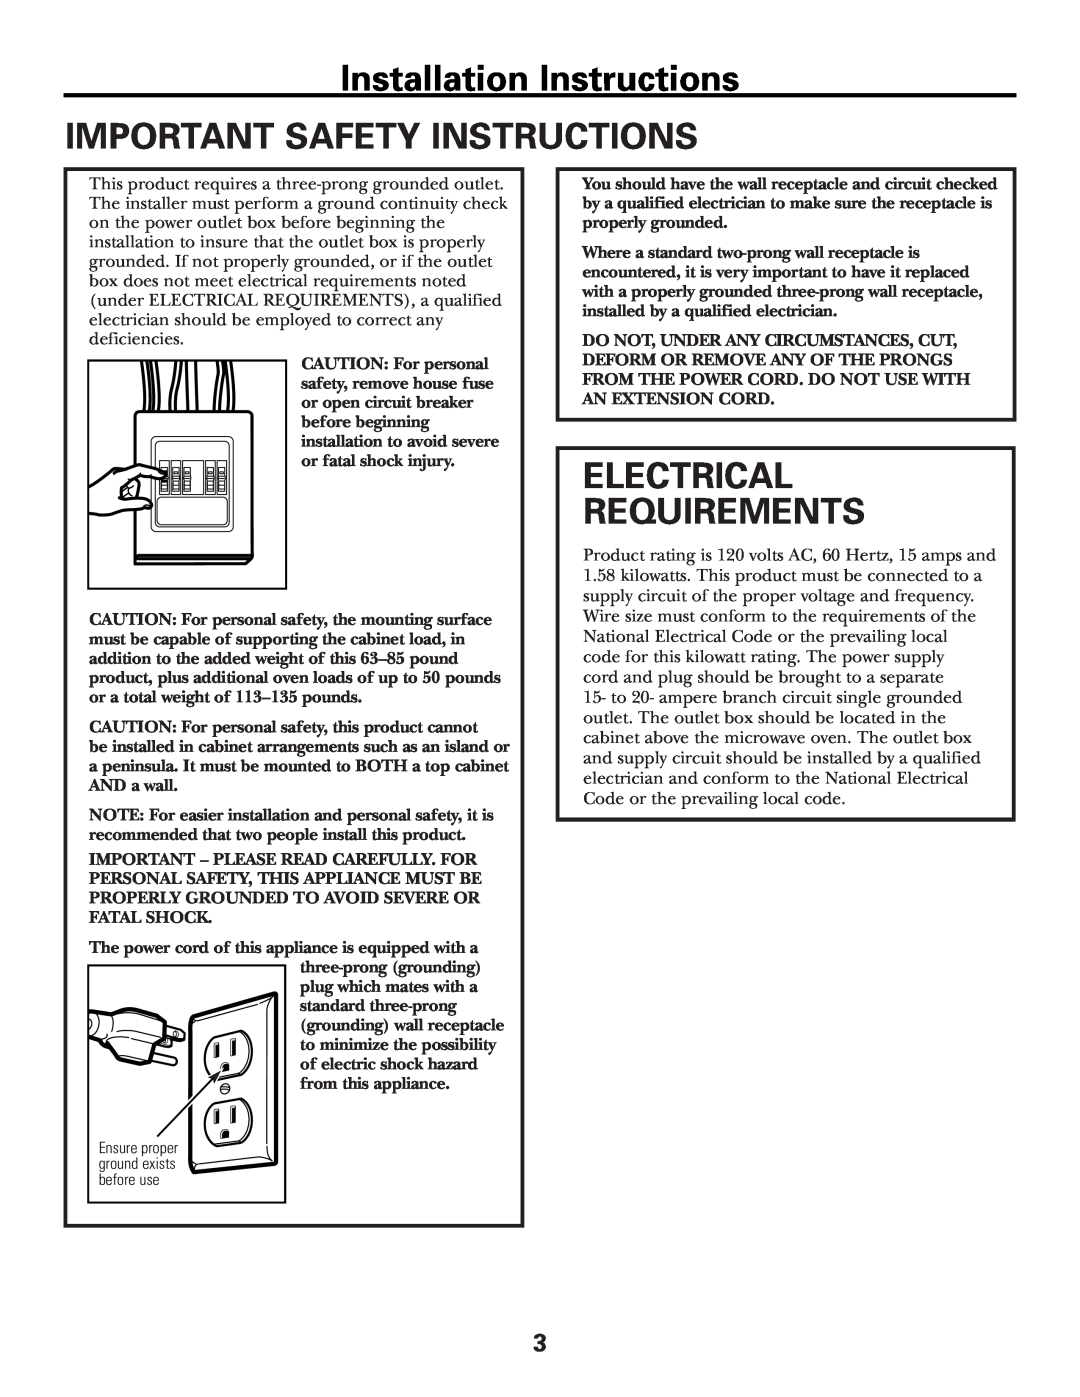 GE CVM2072 warranty Installation Instructions IMPORTANT SAFETY INSTRUCTIONS, Electrical Requirements 